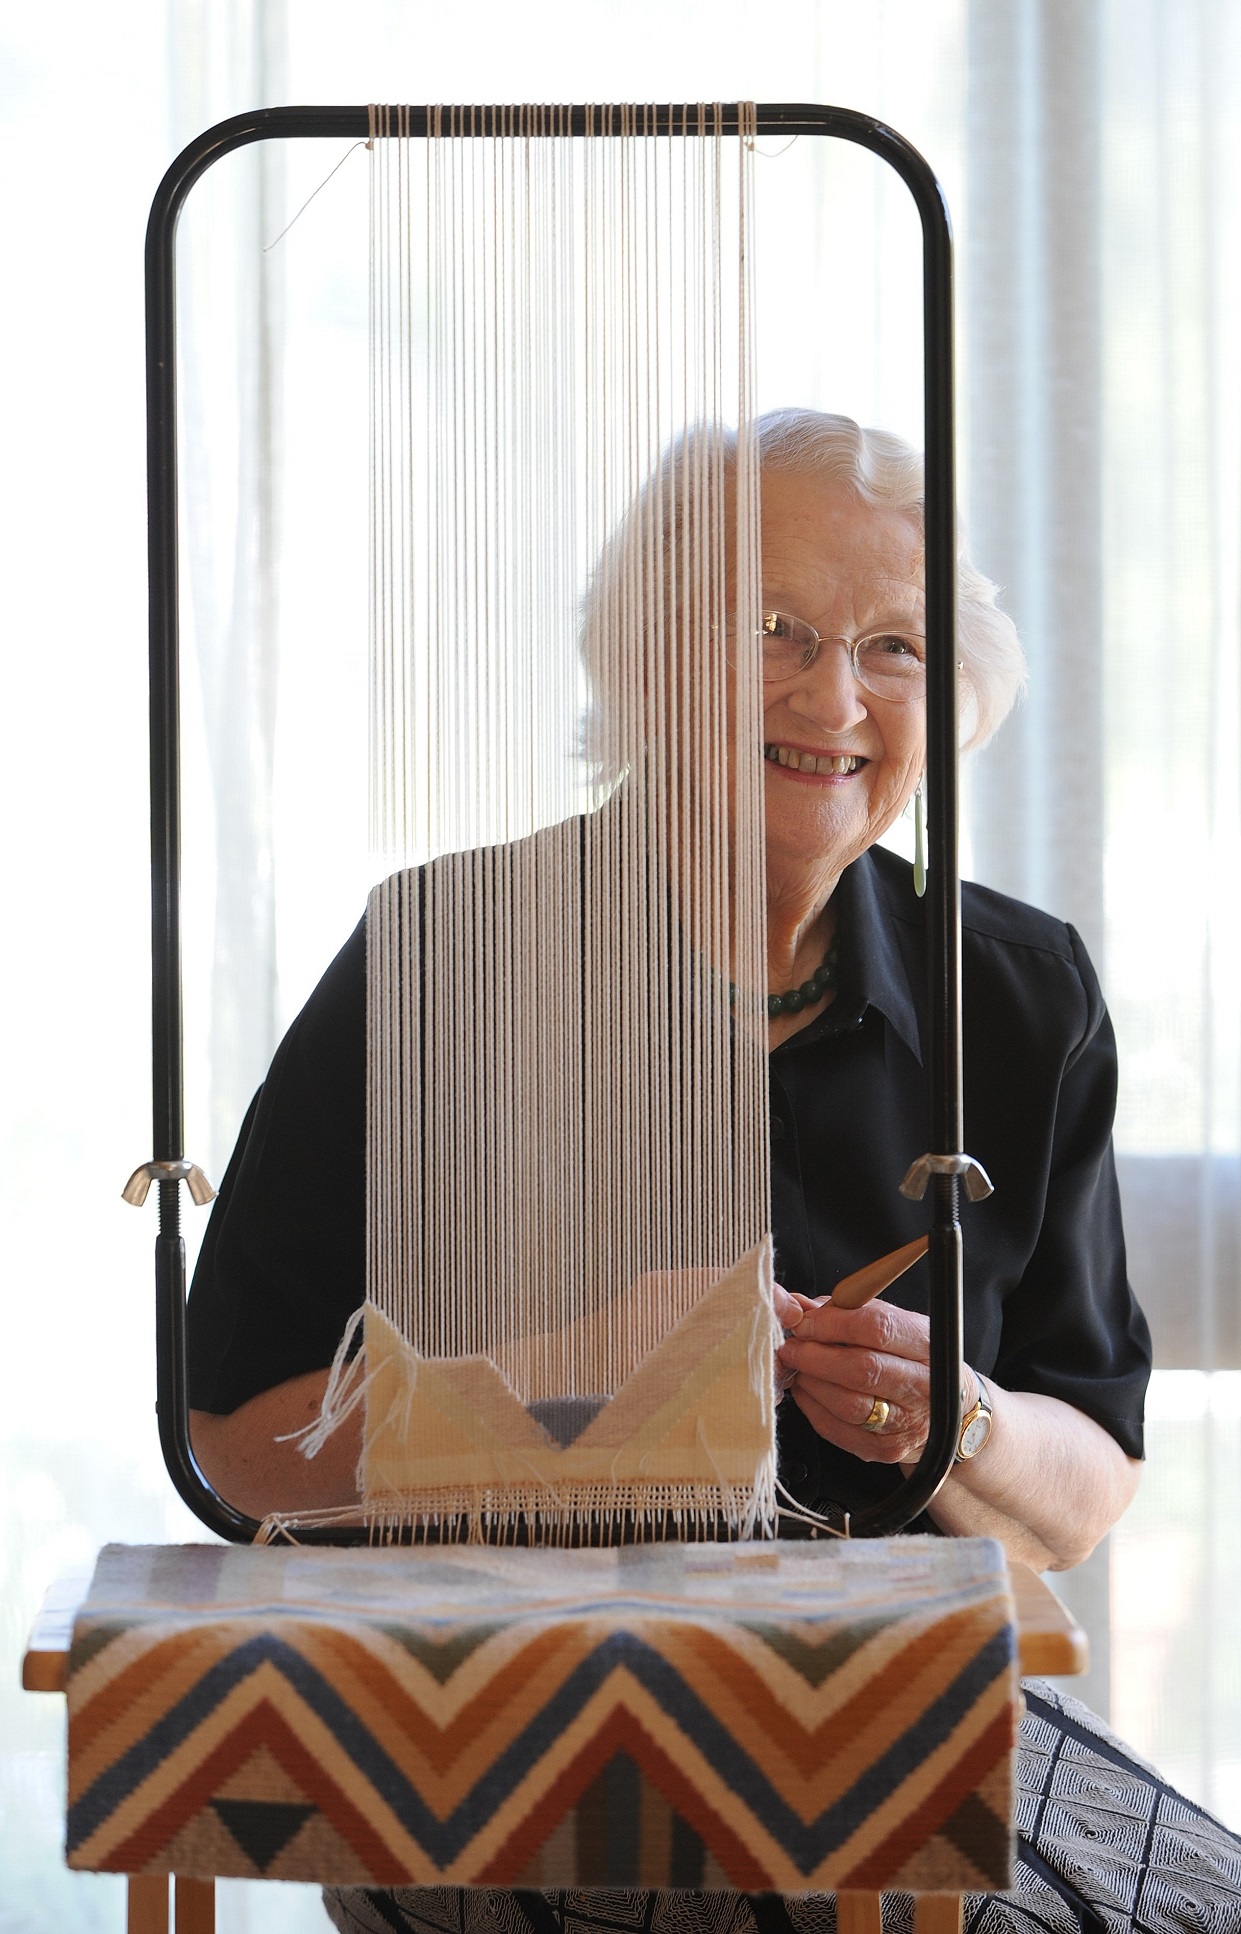 Margery Blackman at her tapestry loom in 2010 at the time of her exhibition at Brett McDowell...